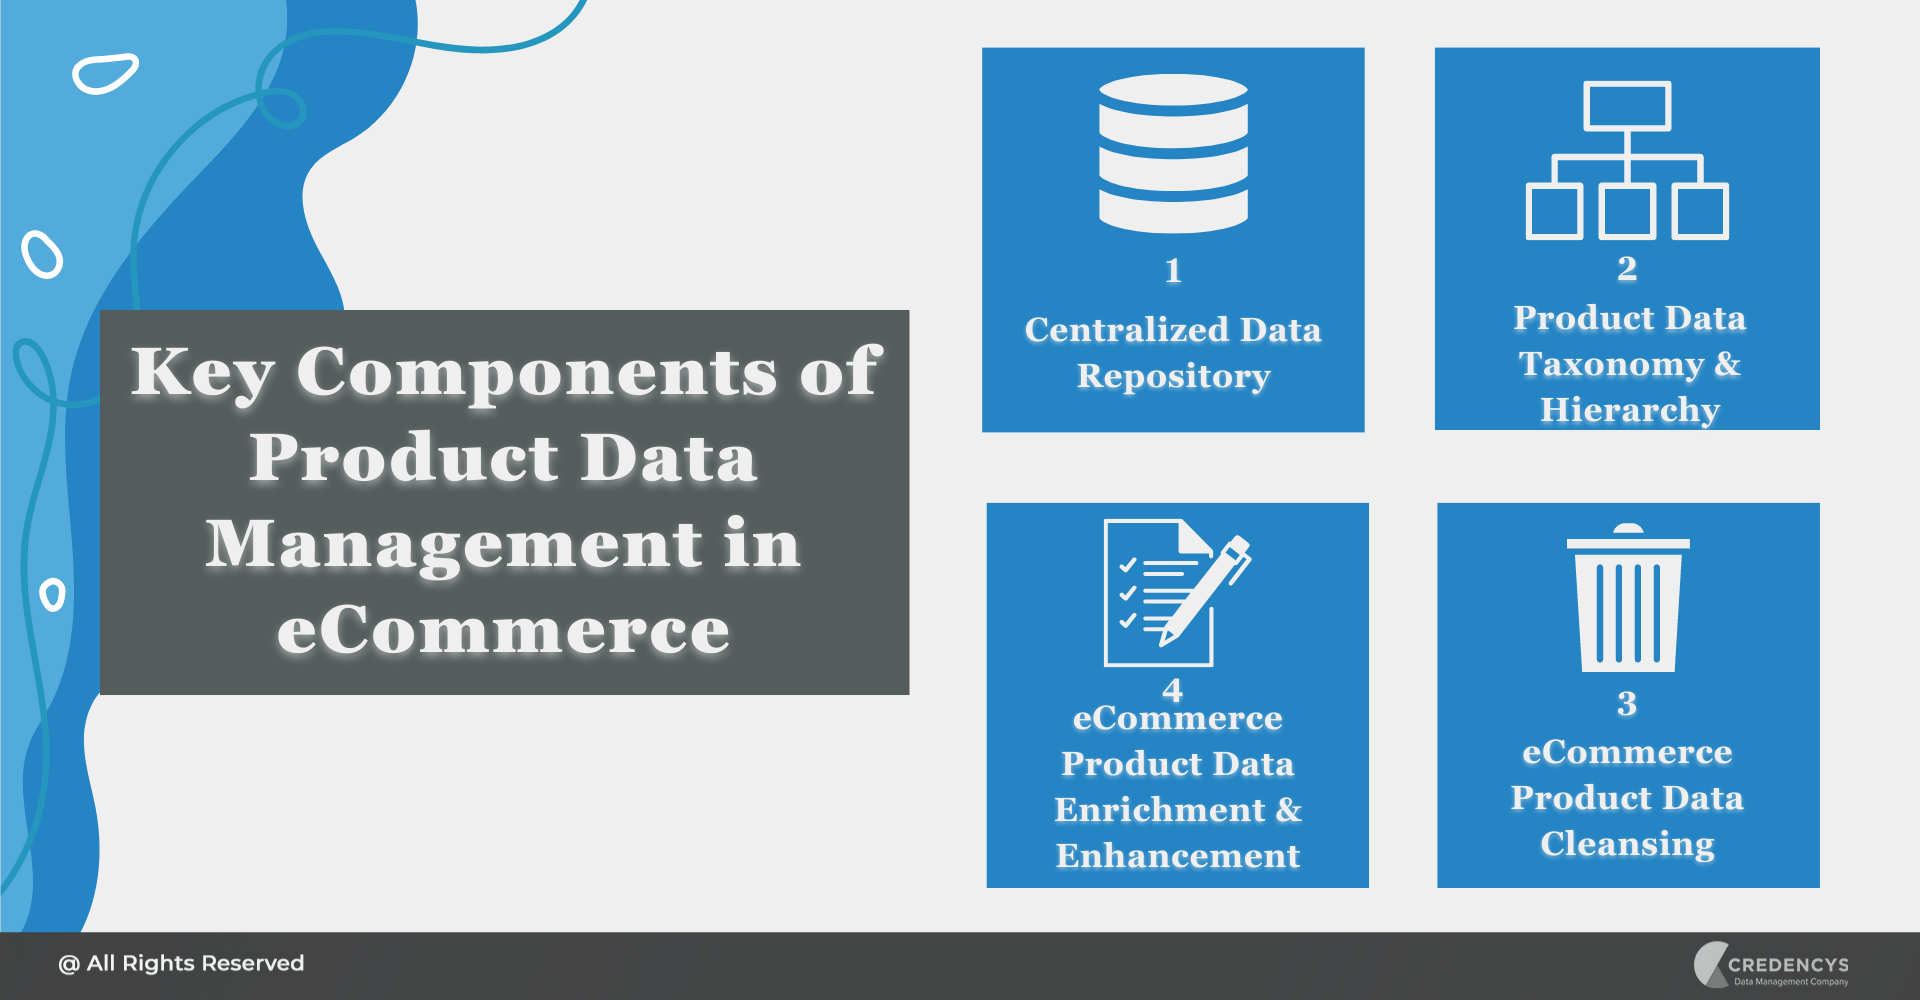 Key Components of Product Data Management in eCommerce